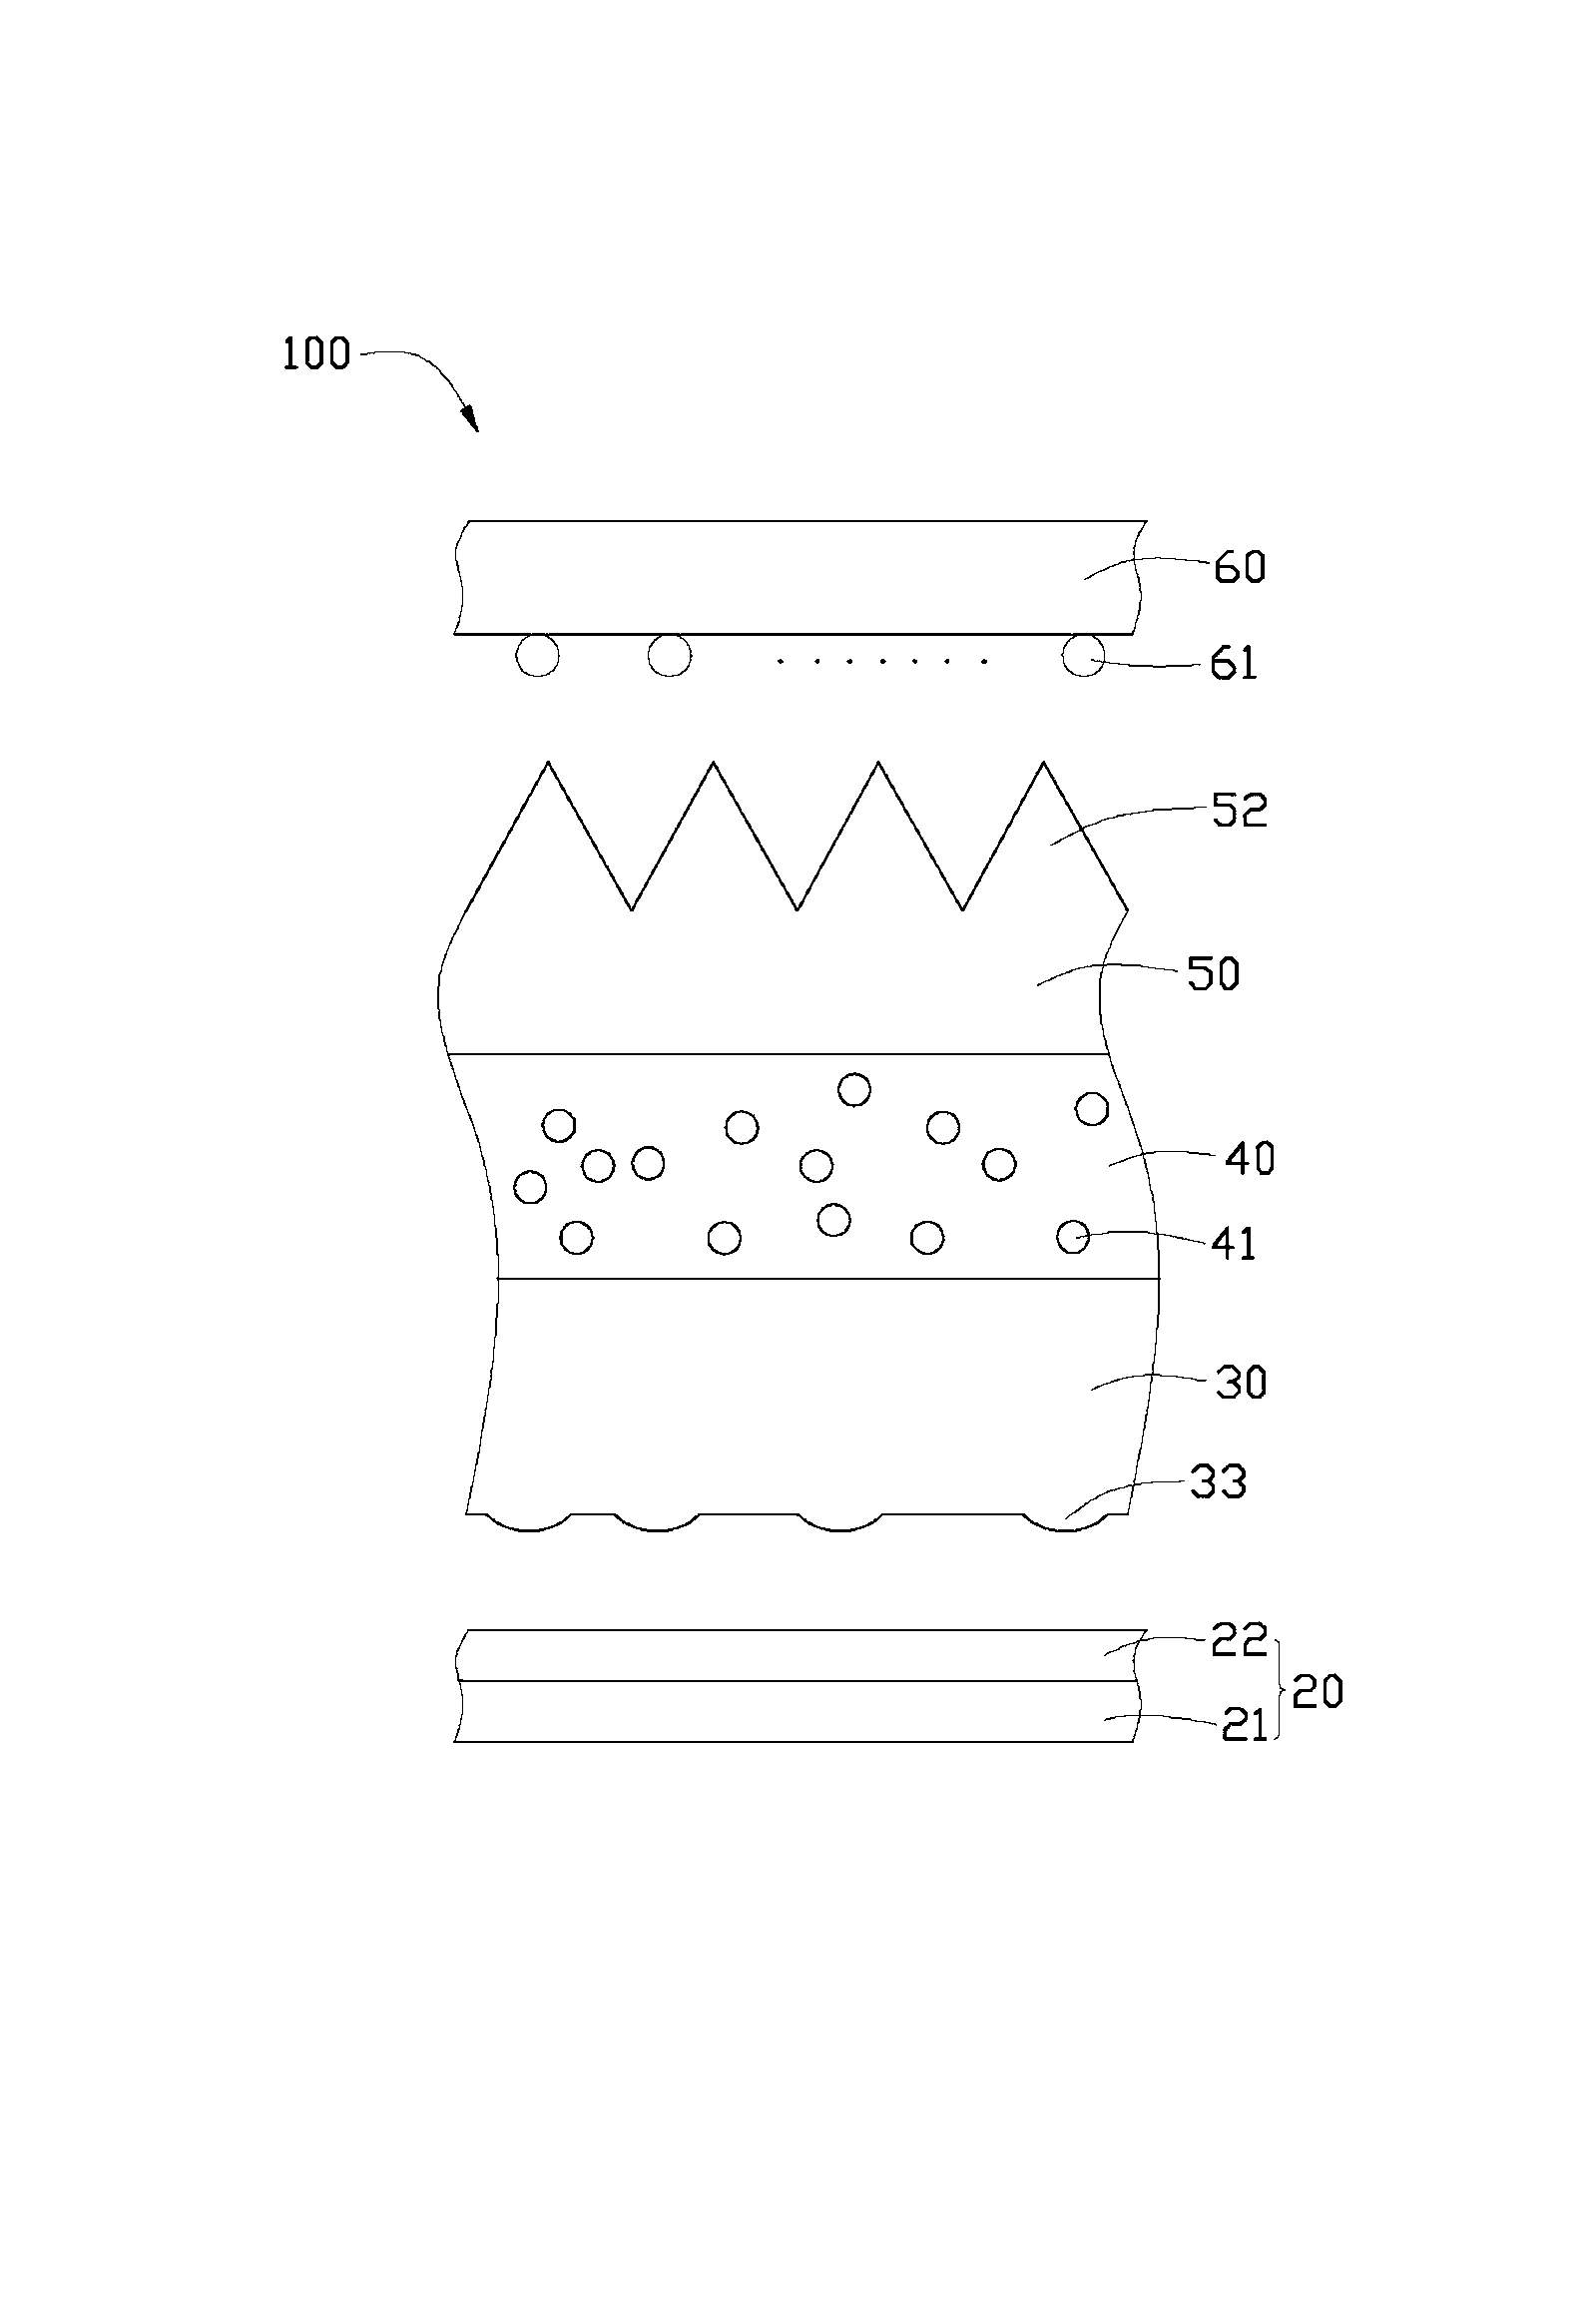 Compound type light guiding module and manufacturing method thereof